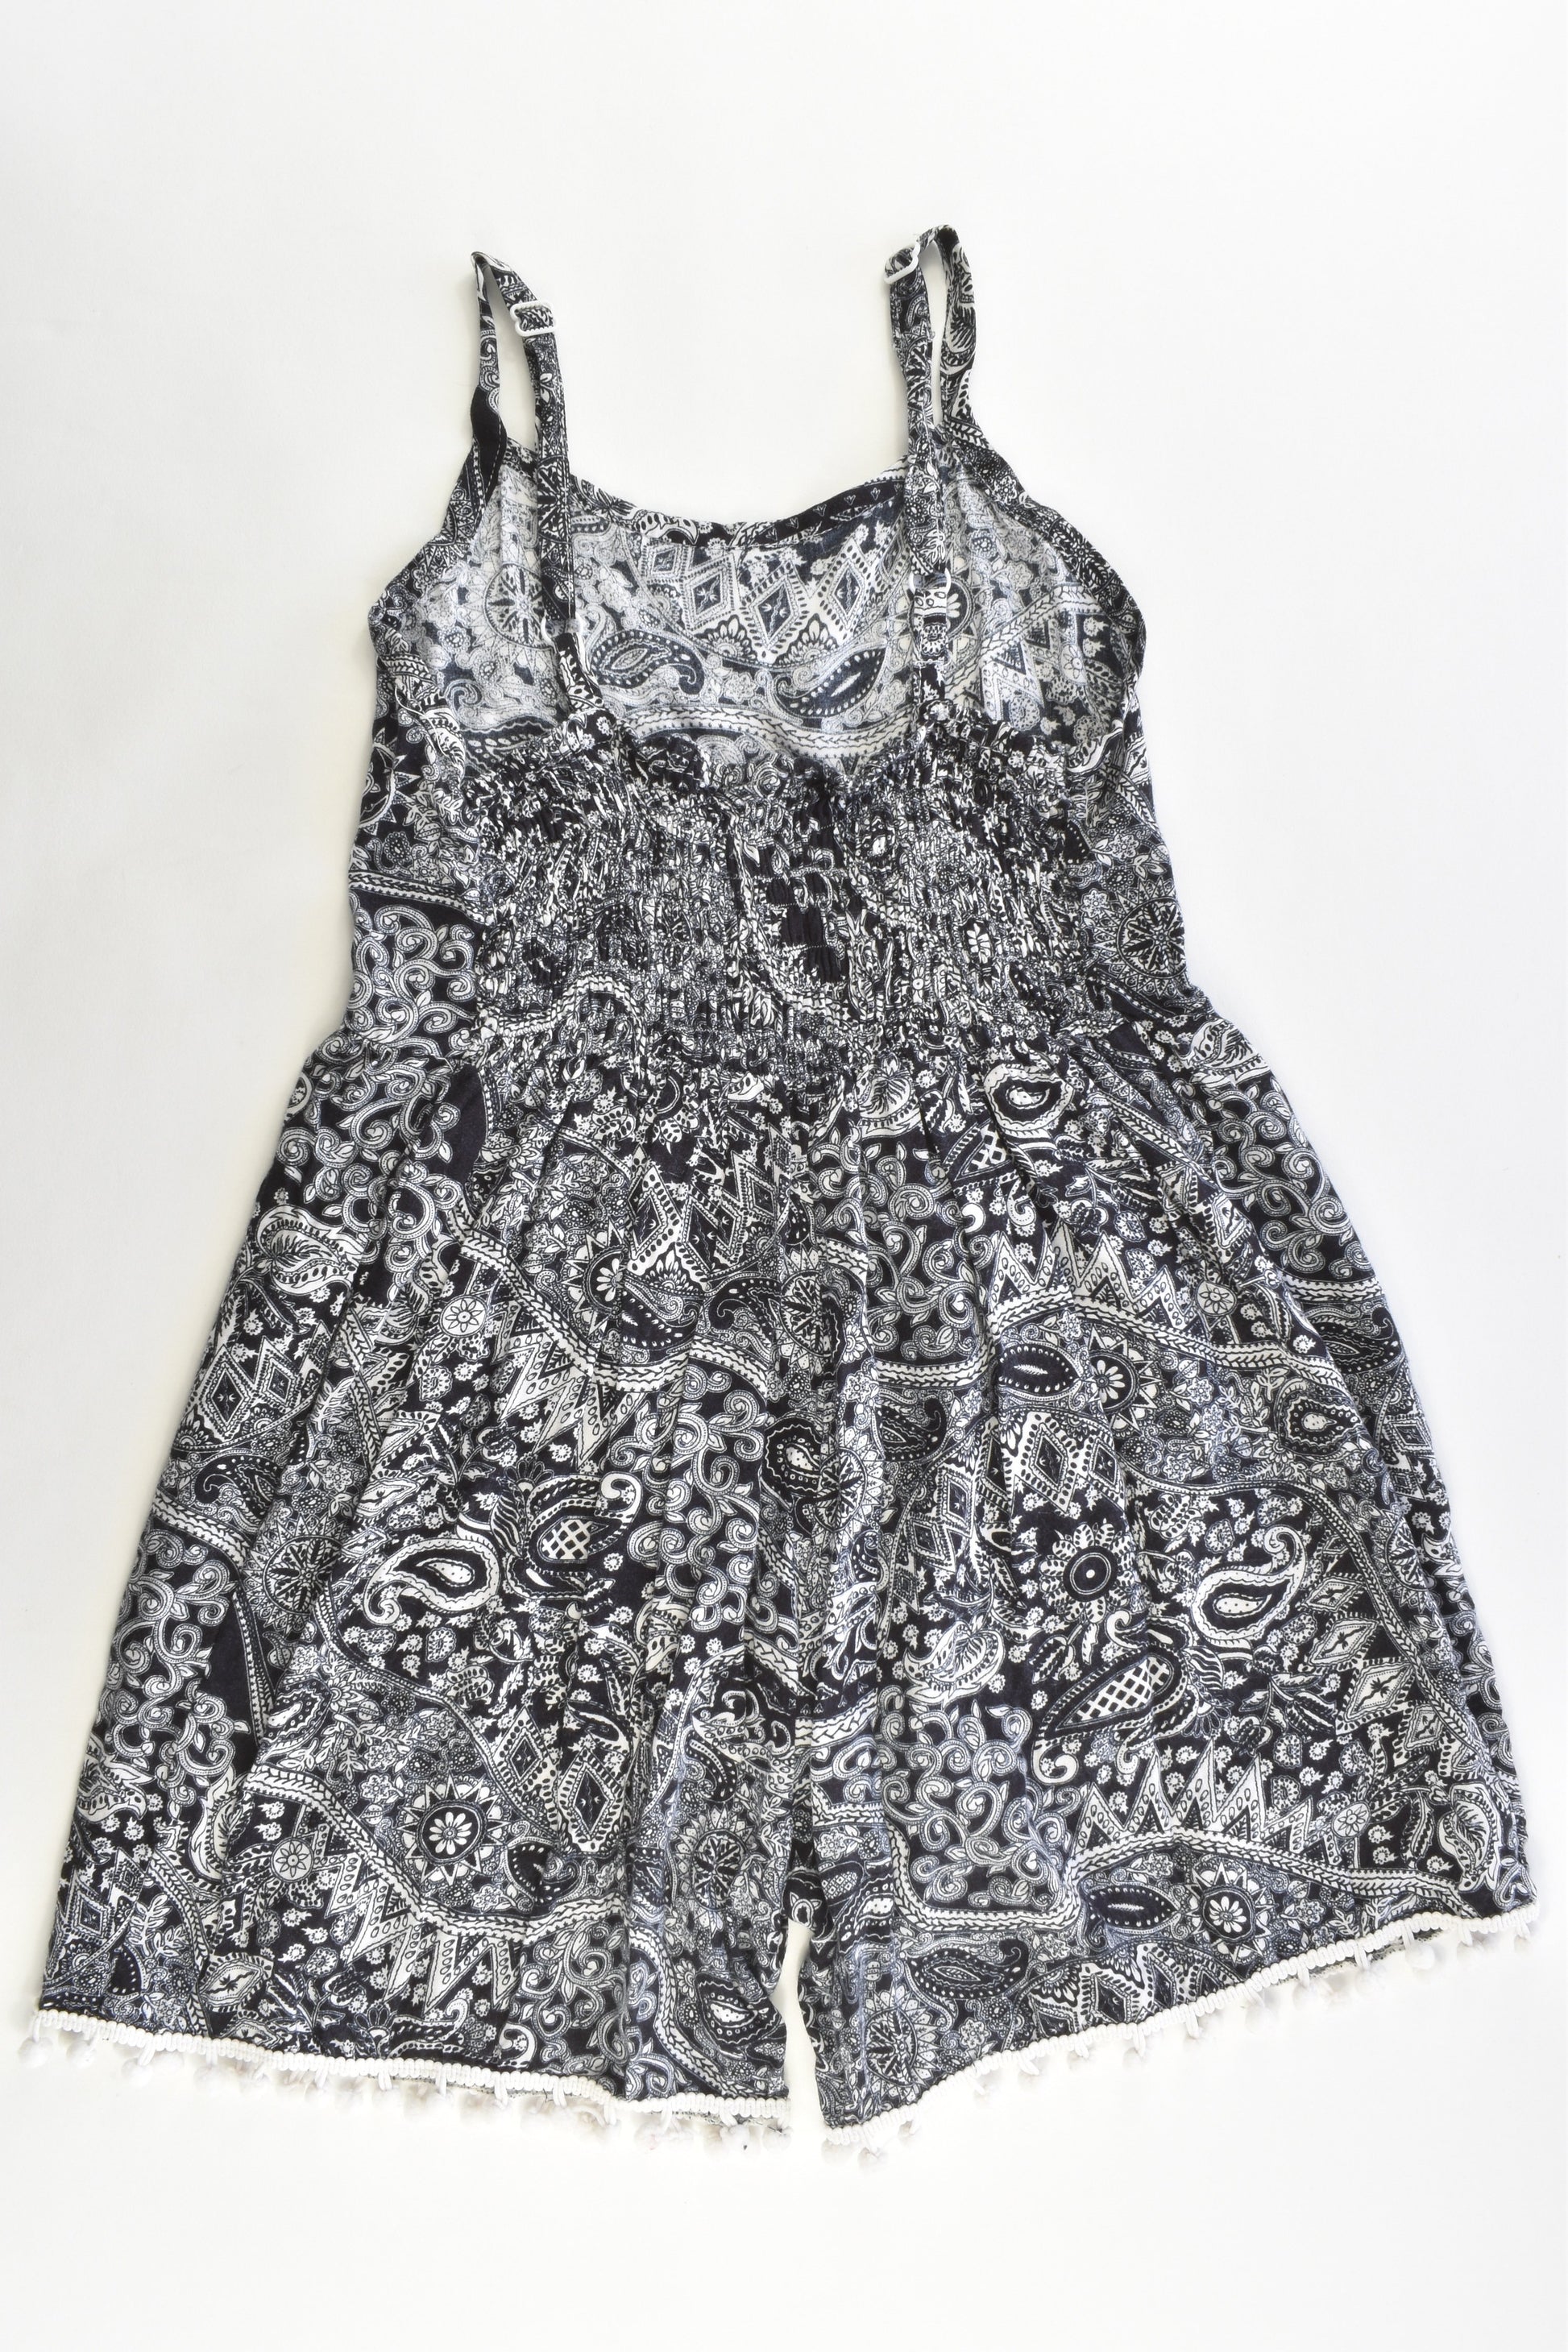 Bali Size approx 8-10 Playsuit